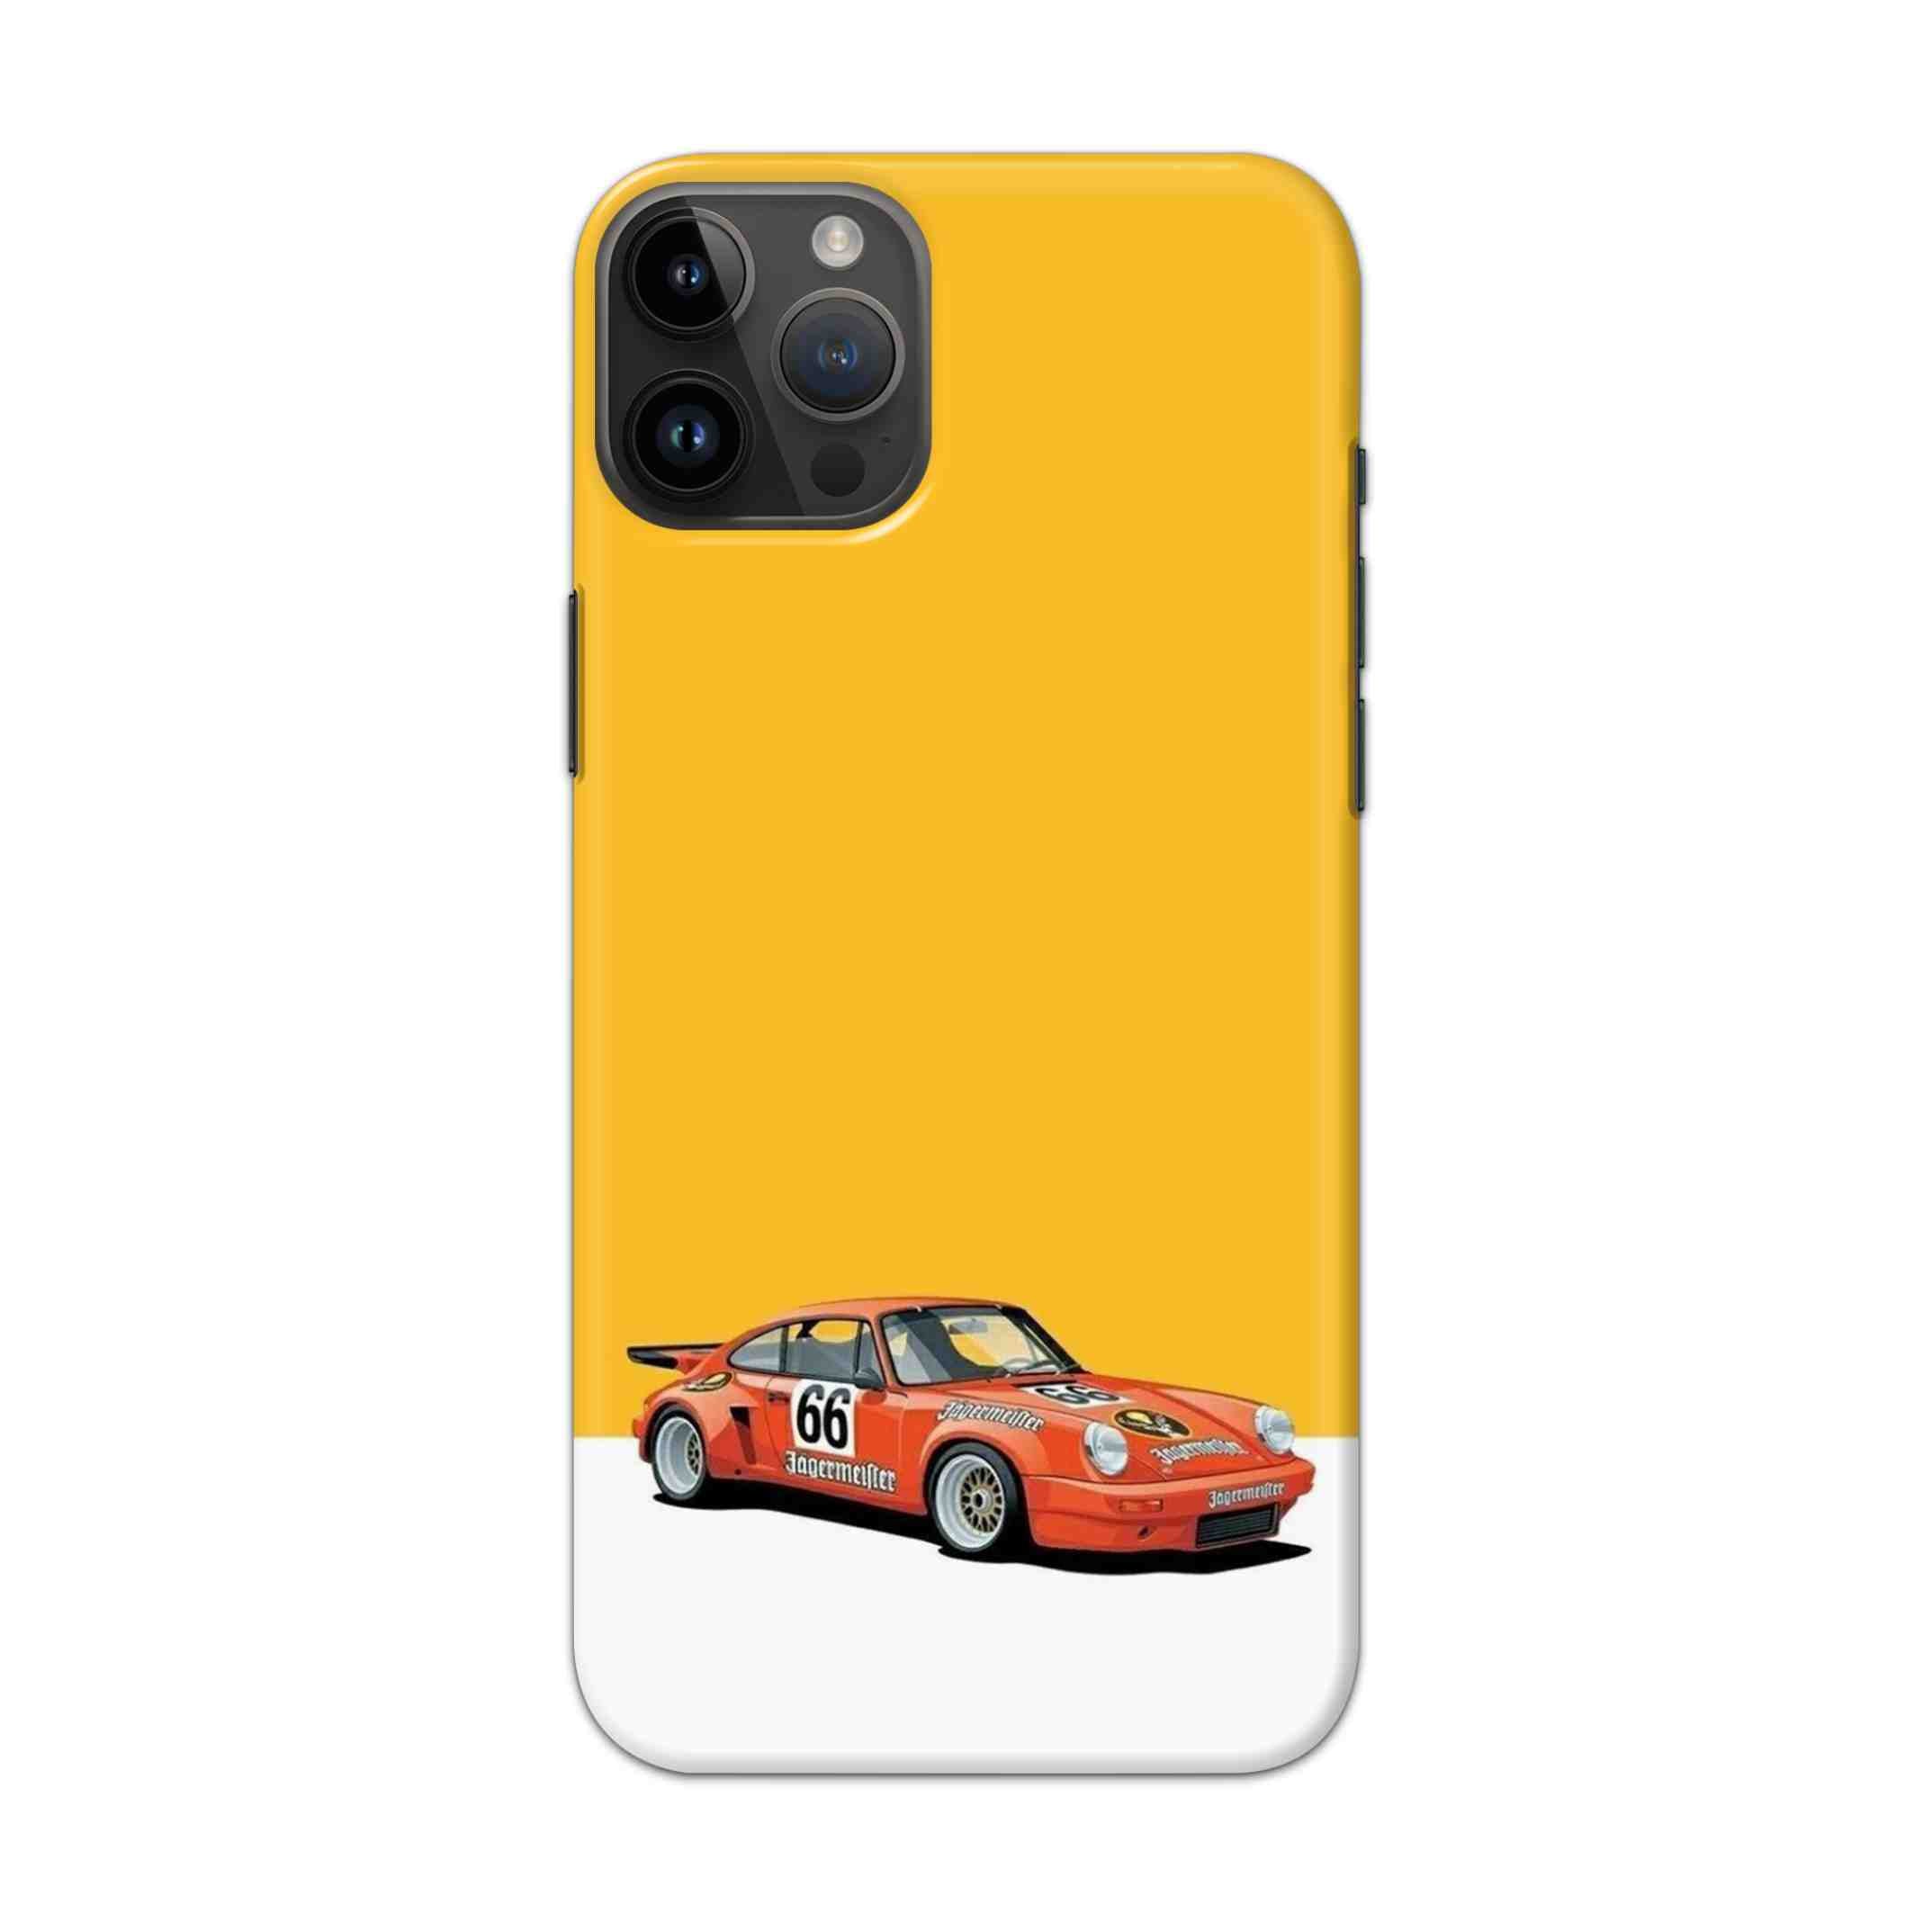 Buy Porche Hard Back Mobile Phone Case/Cover For iPhone 14 Pro Max Online